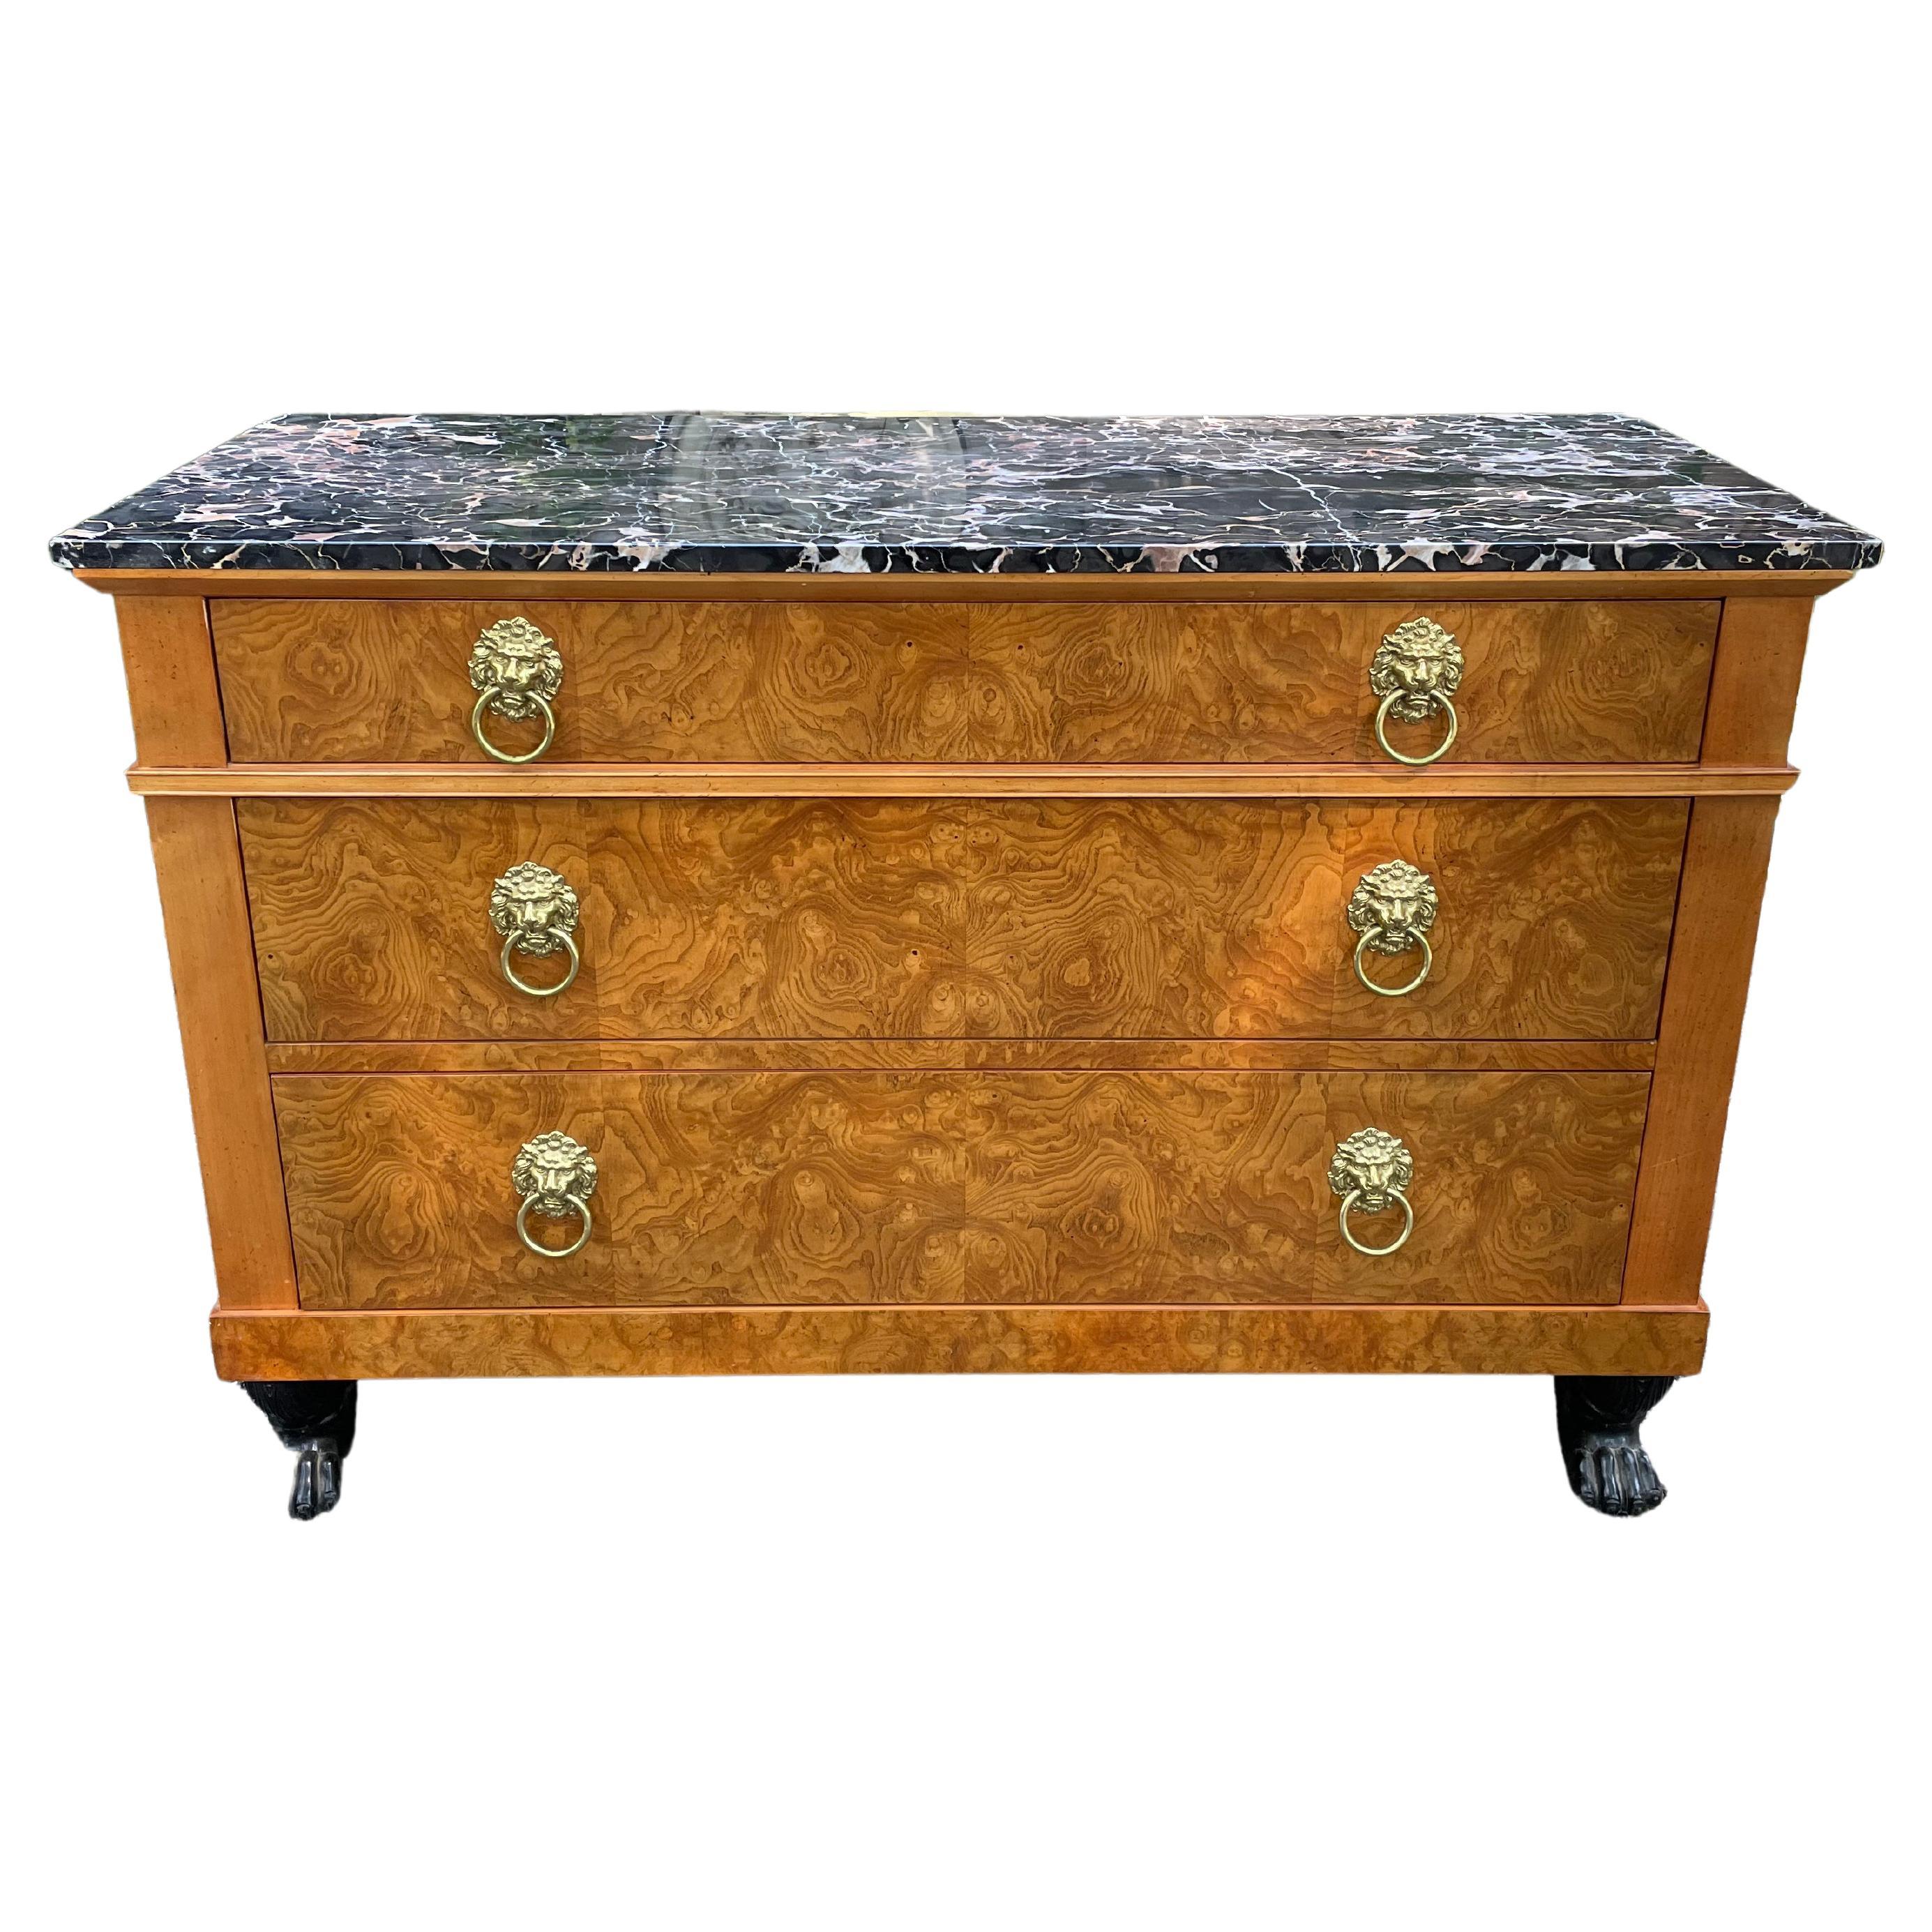 Sumptuous Baker Collectors Edition Neoclassical Style Marble Top Chest